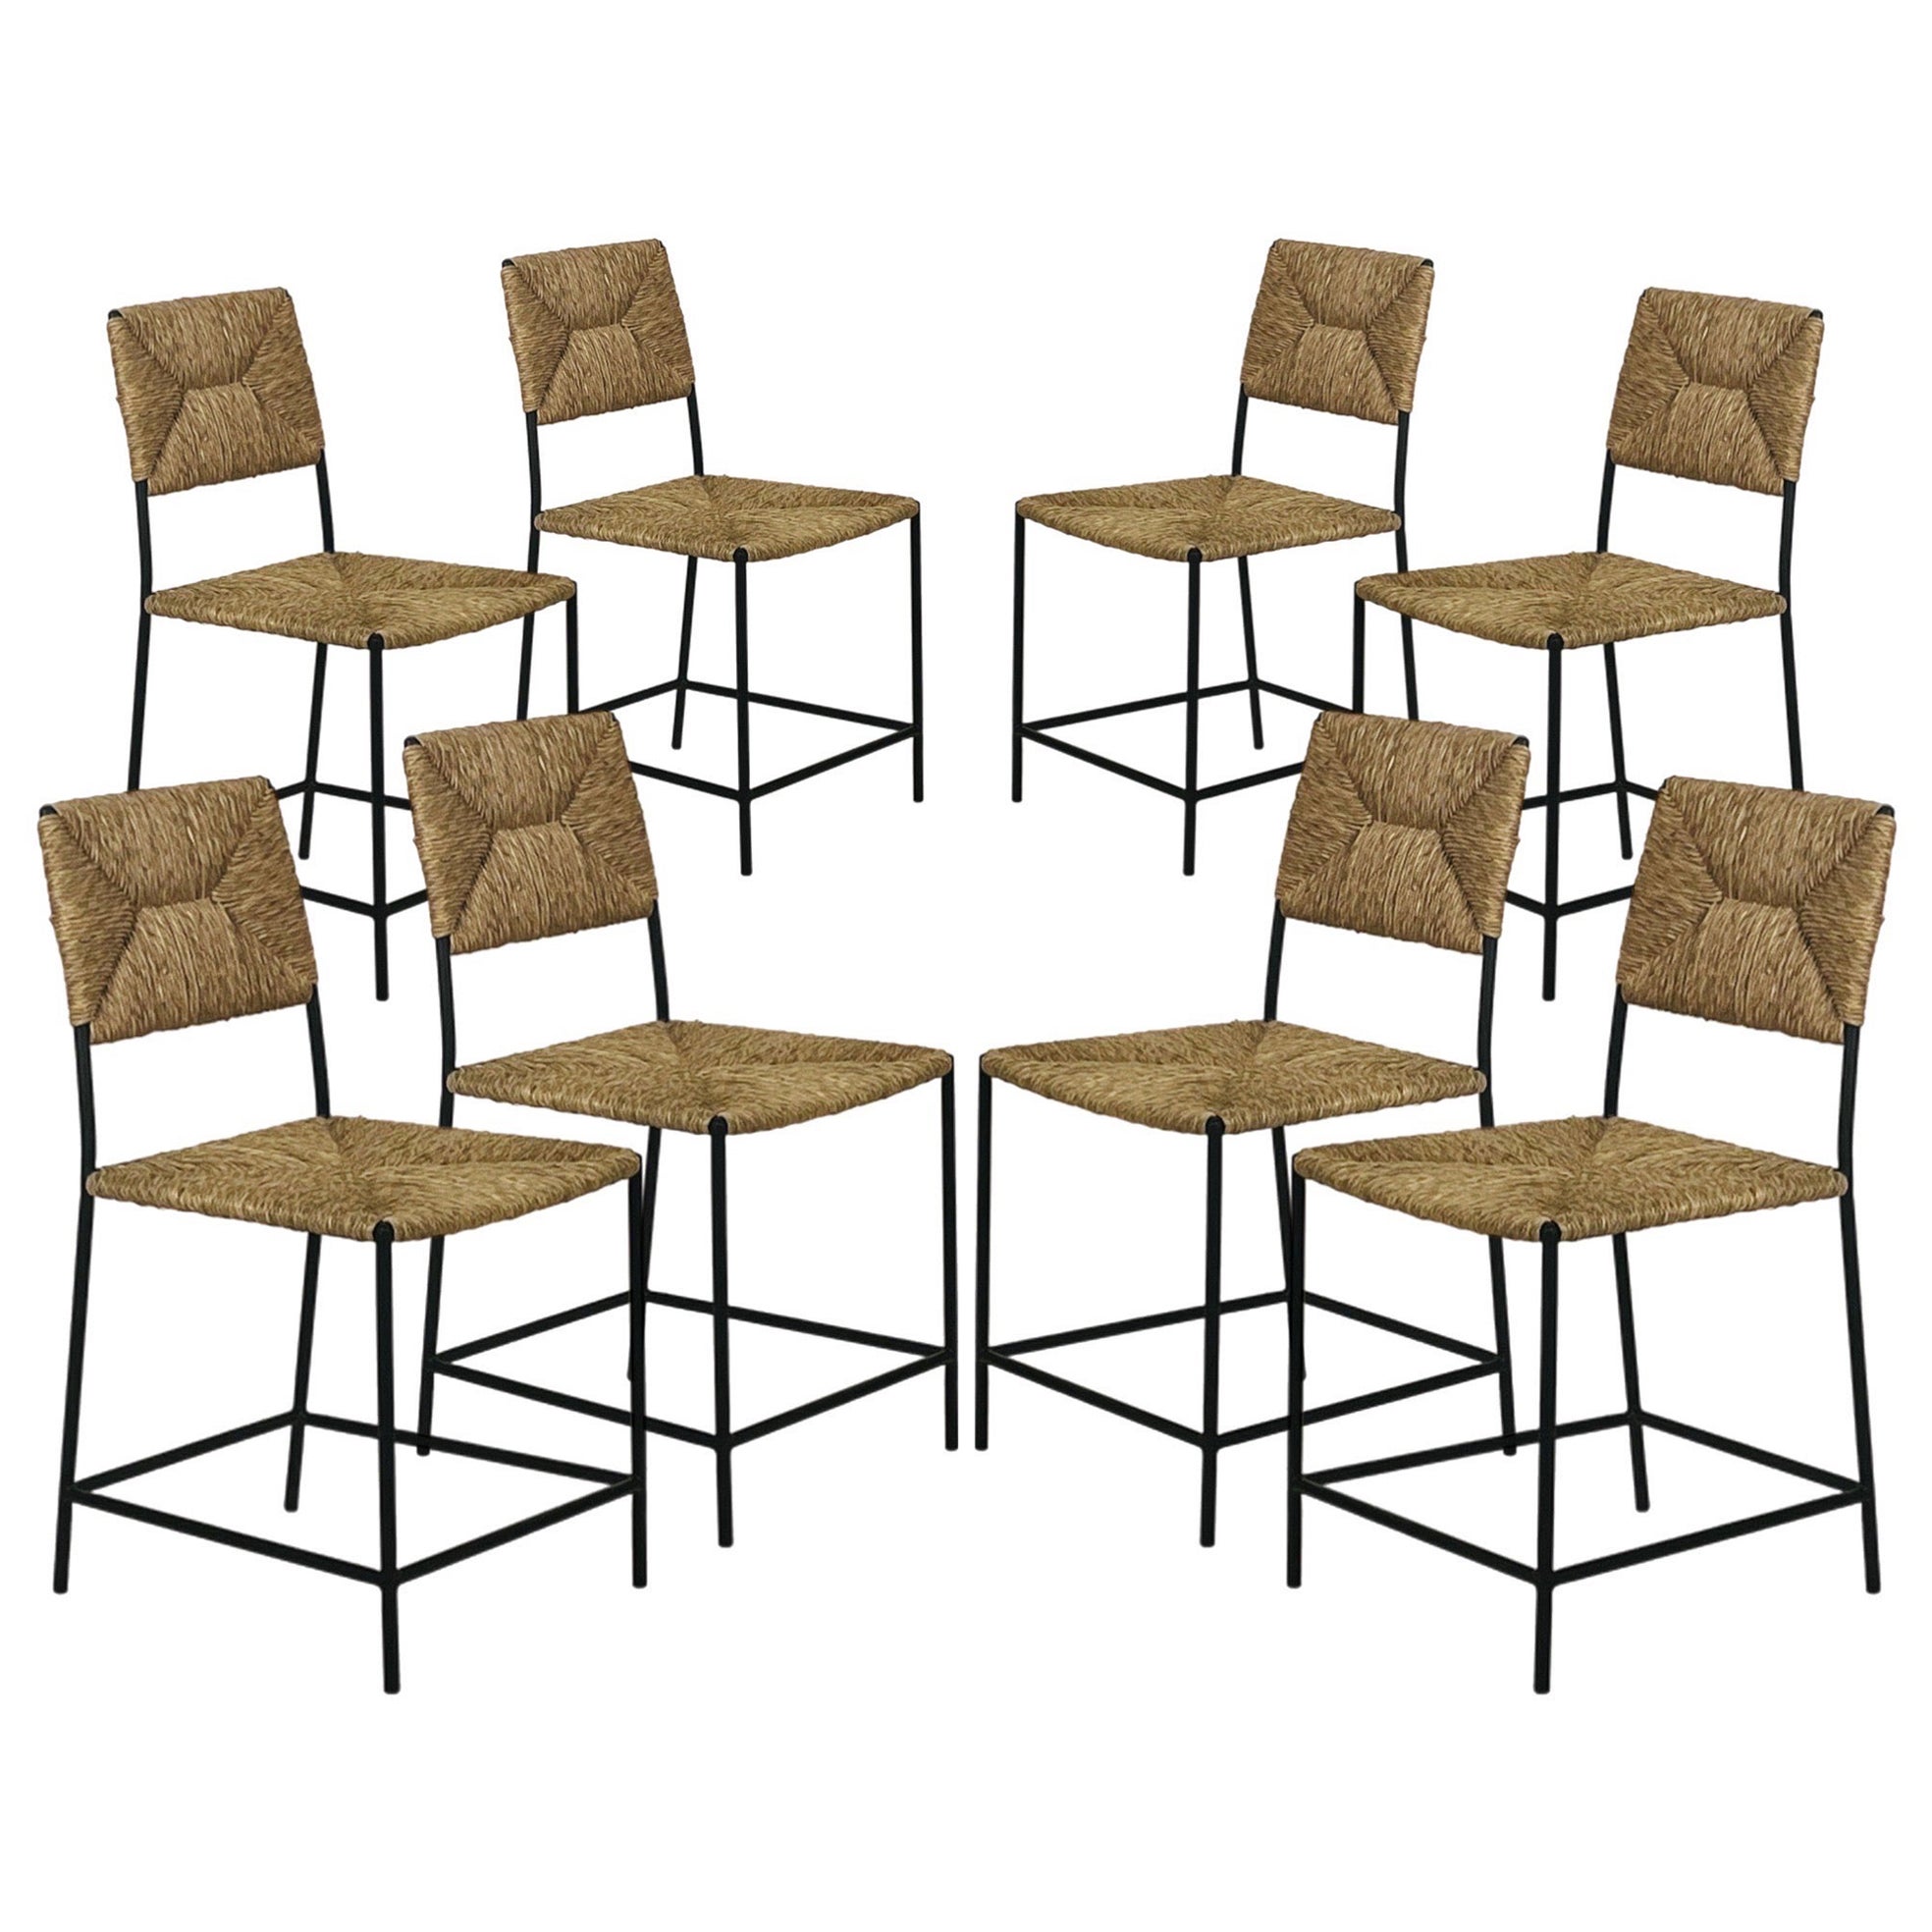 Set of 8 'Campagne' Dining Chairs by Design Frères For Sale